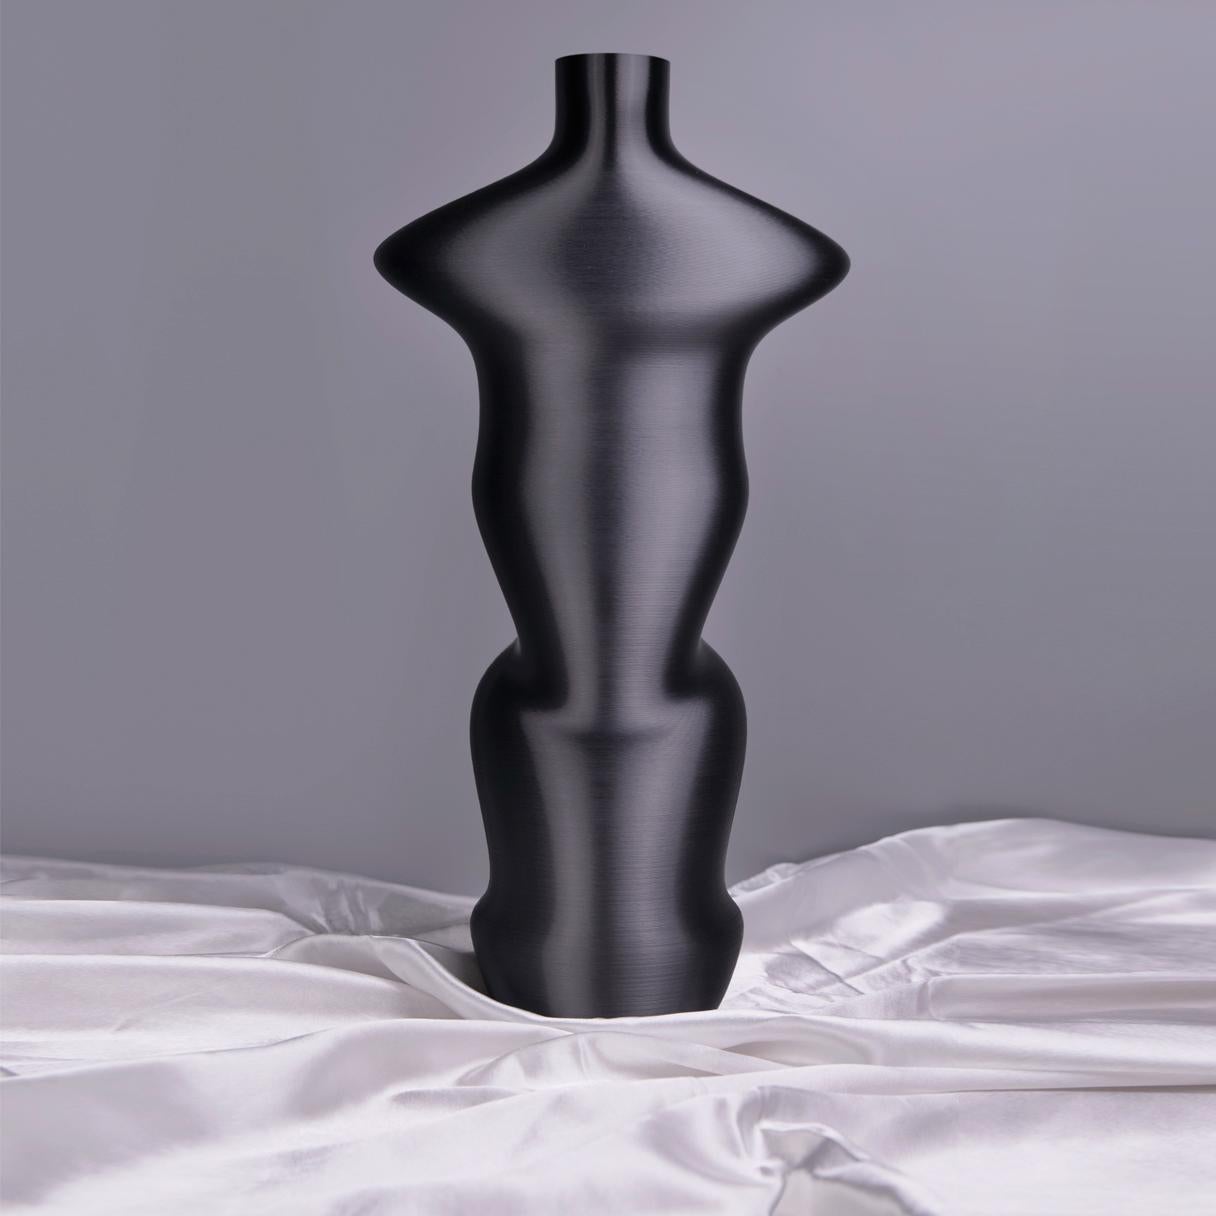 Vase-sculpture by DygoDesign.

A singular design vase; These sculptures are inspired by a mythological oriental tale remembered during the ”Star Festival” where its celebrated the reunification of two divinities represented by the stars Vega and